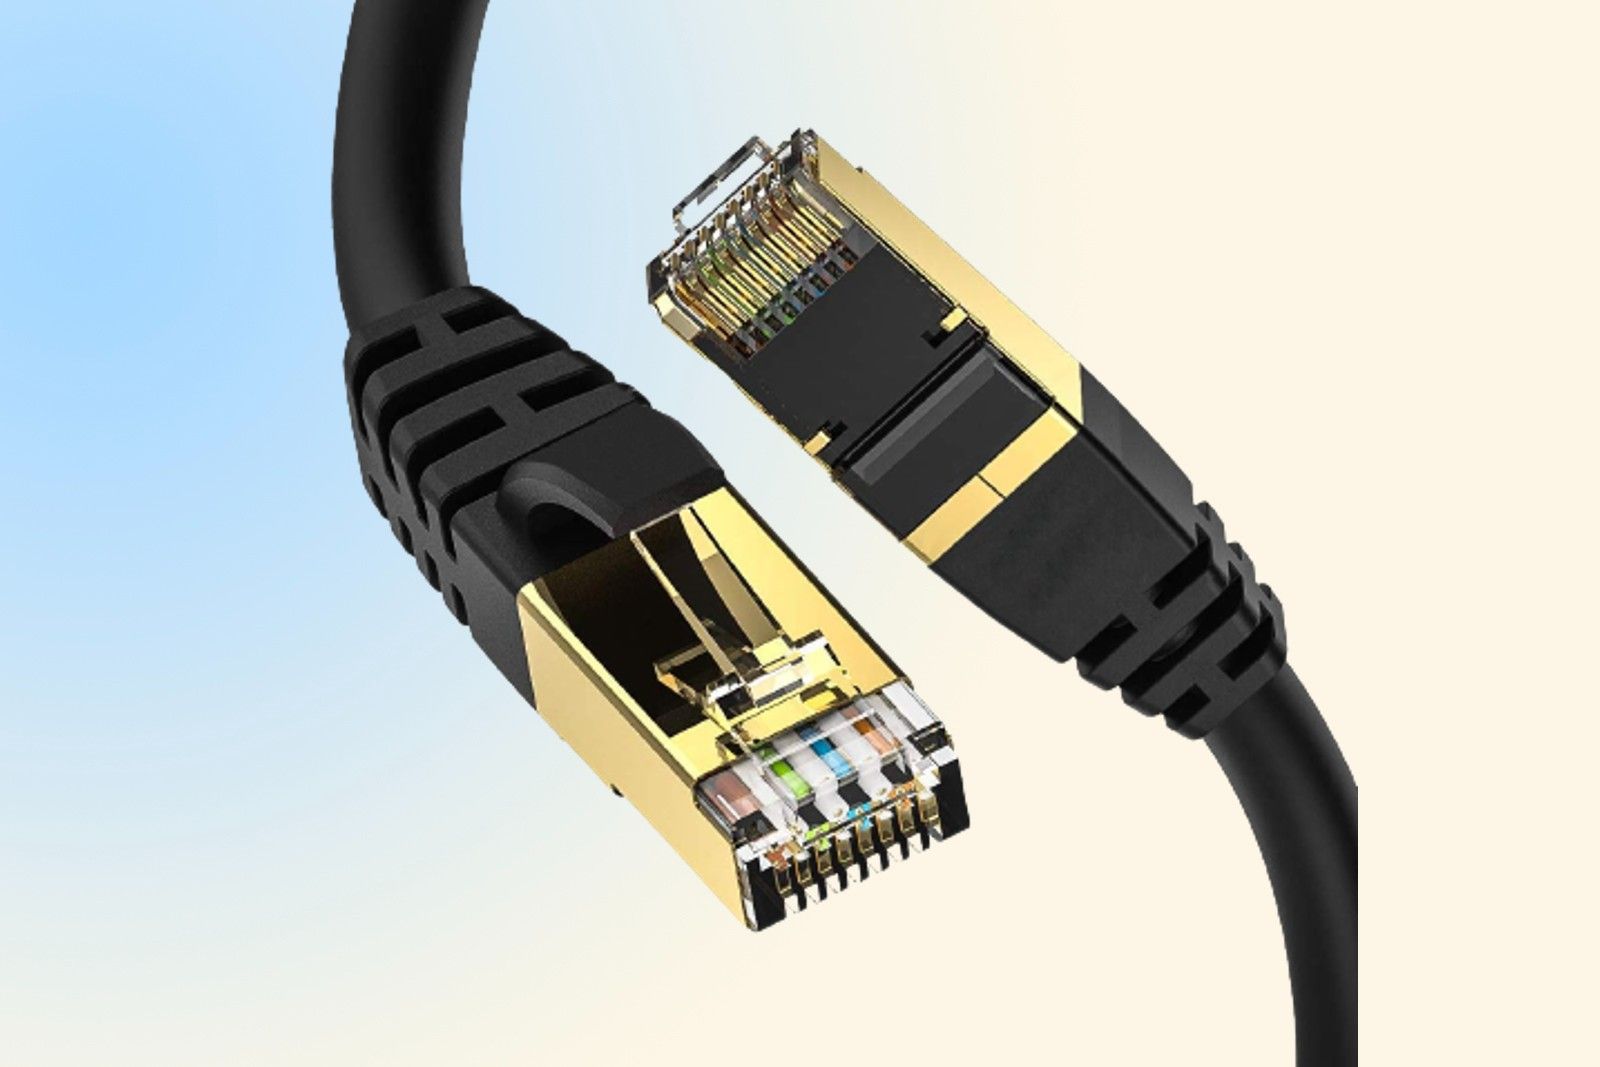 Is cat 8 the best ethernet cable for gaming?